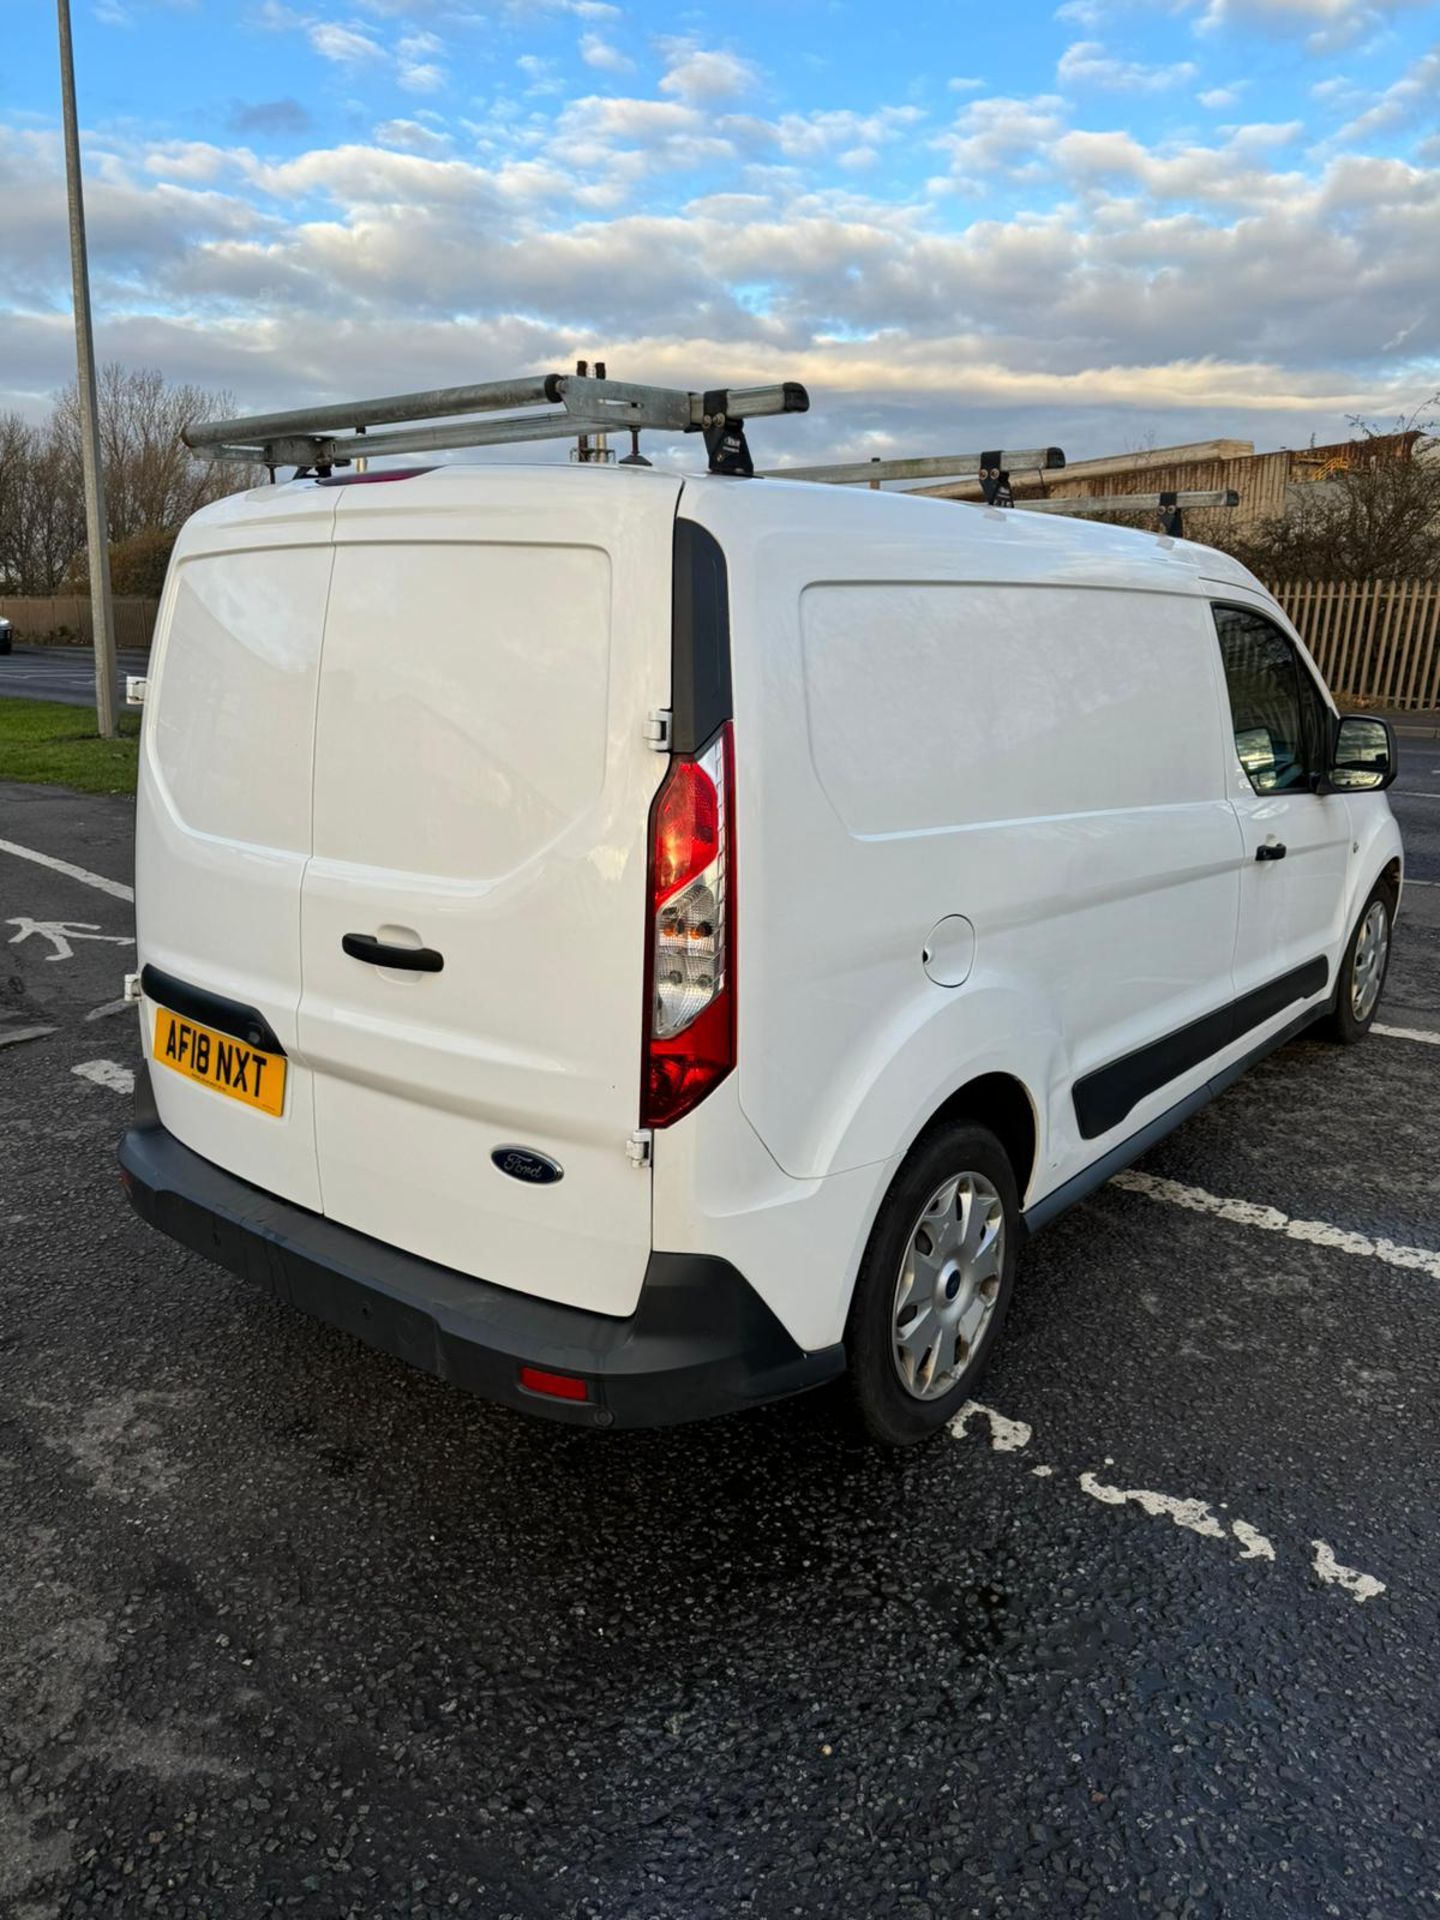 2018 18 FORD TRANSIT CONNECT TREND PAENL VAN - 128K MILES - EURO 6 - 3 SEATS - LWB - ROOF RACK - Image 2 of 11